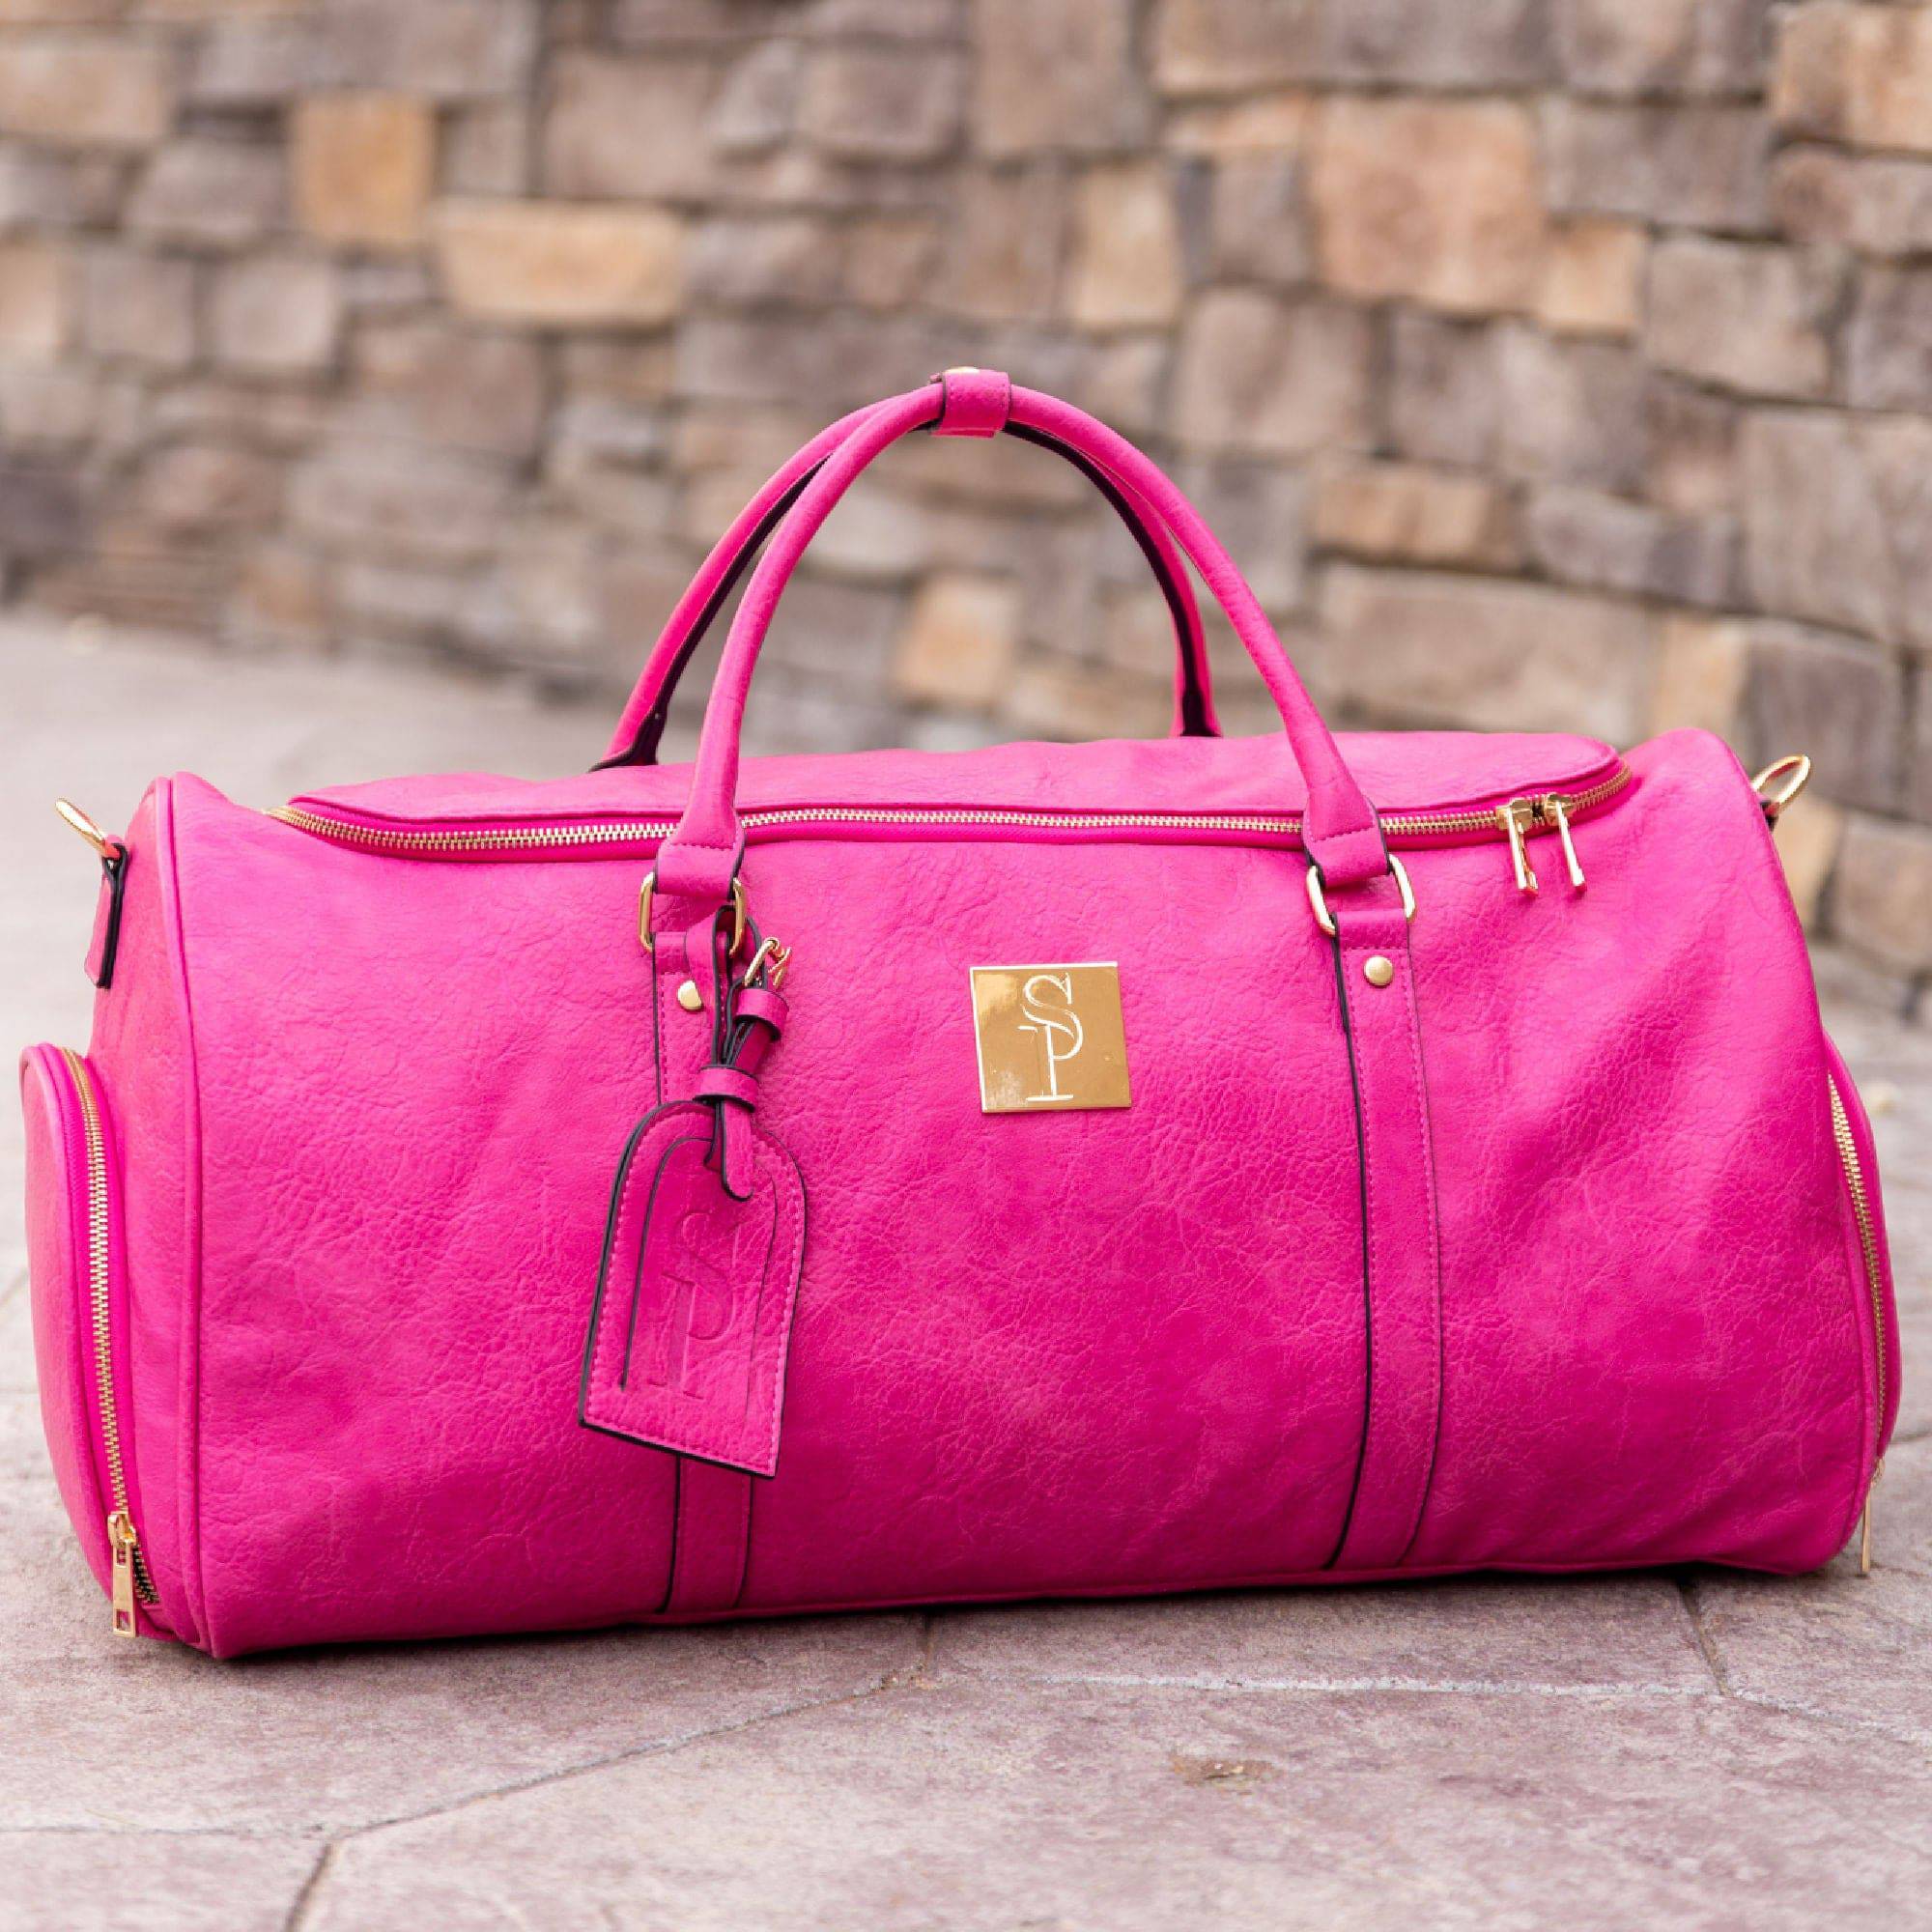 Pink Duffle Bag Front